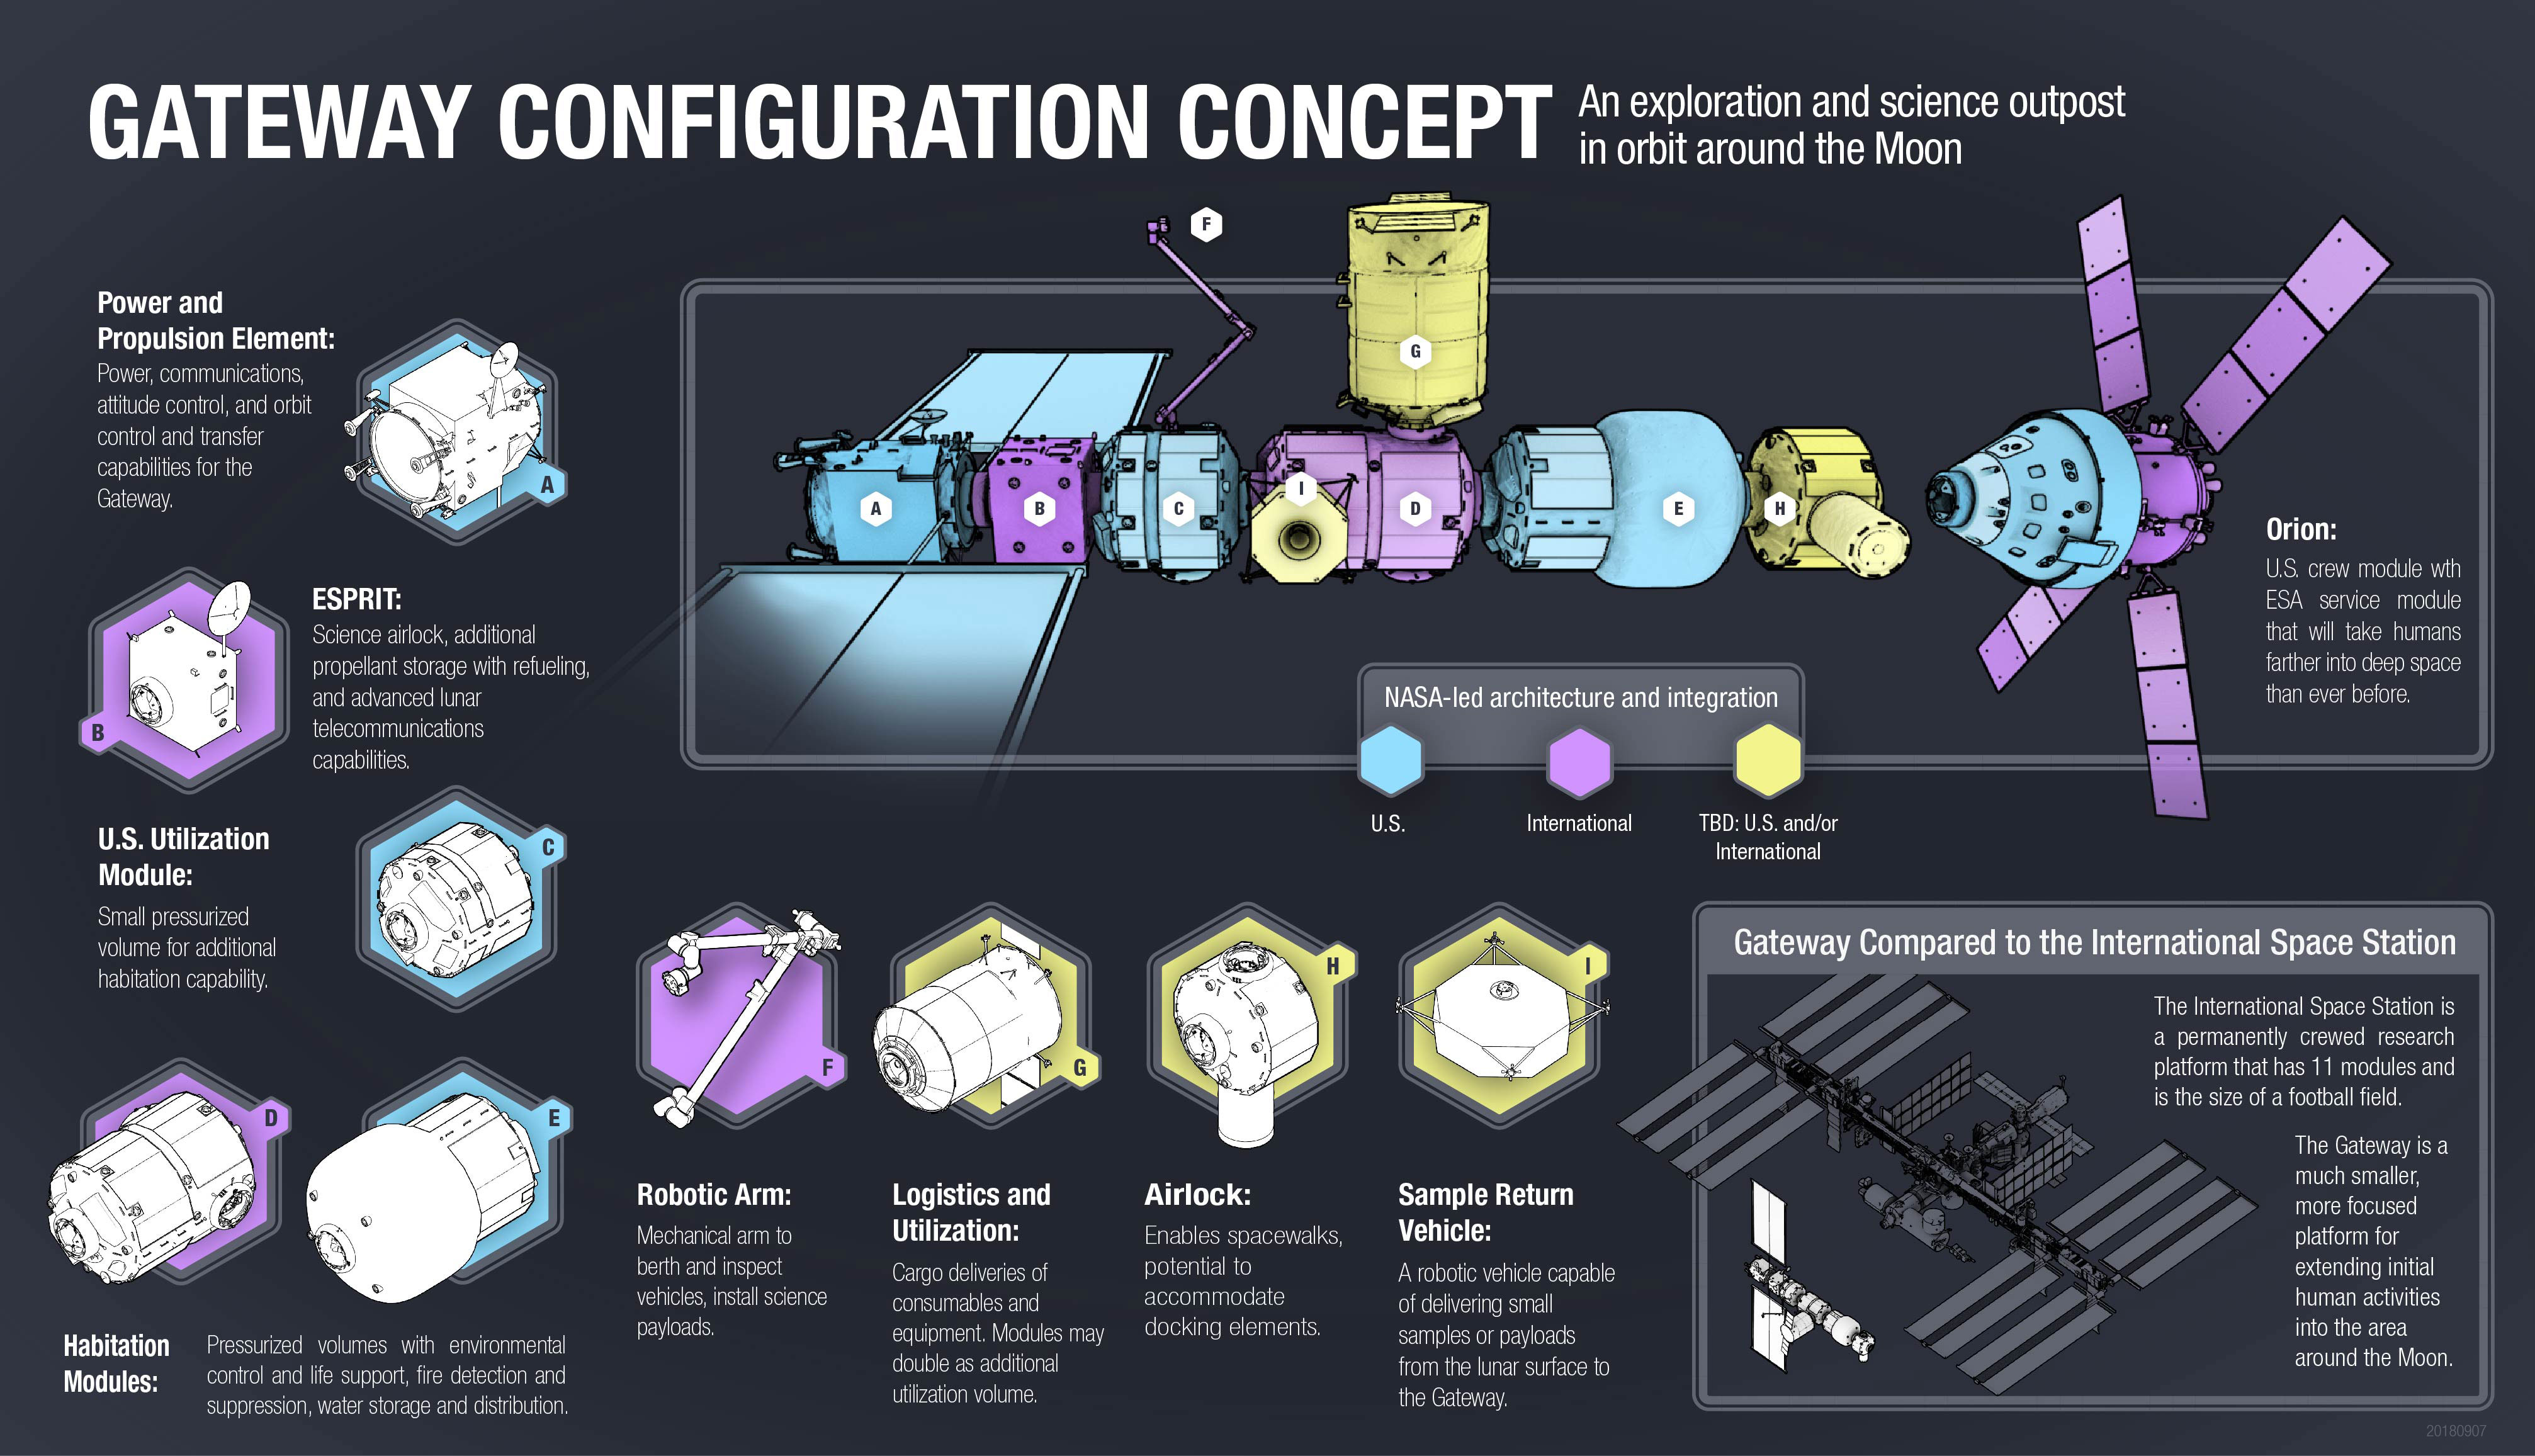 Graphic showing a possible configuration for the future lunar gateway